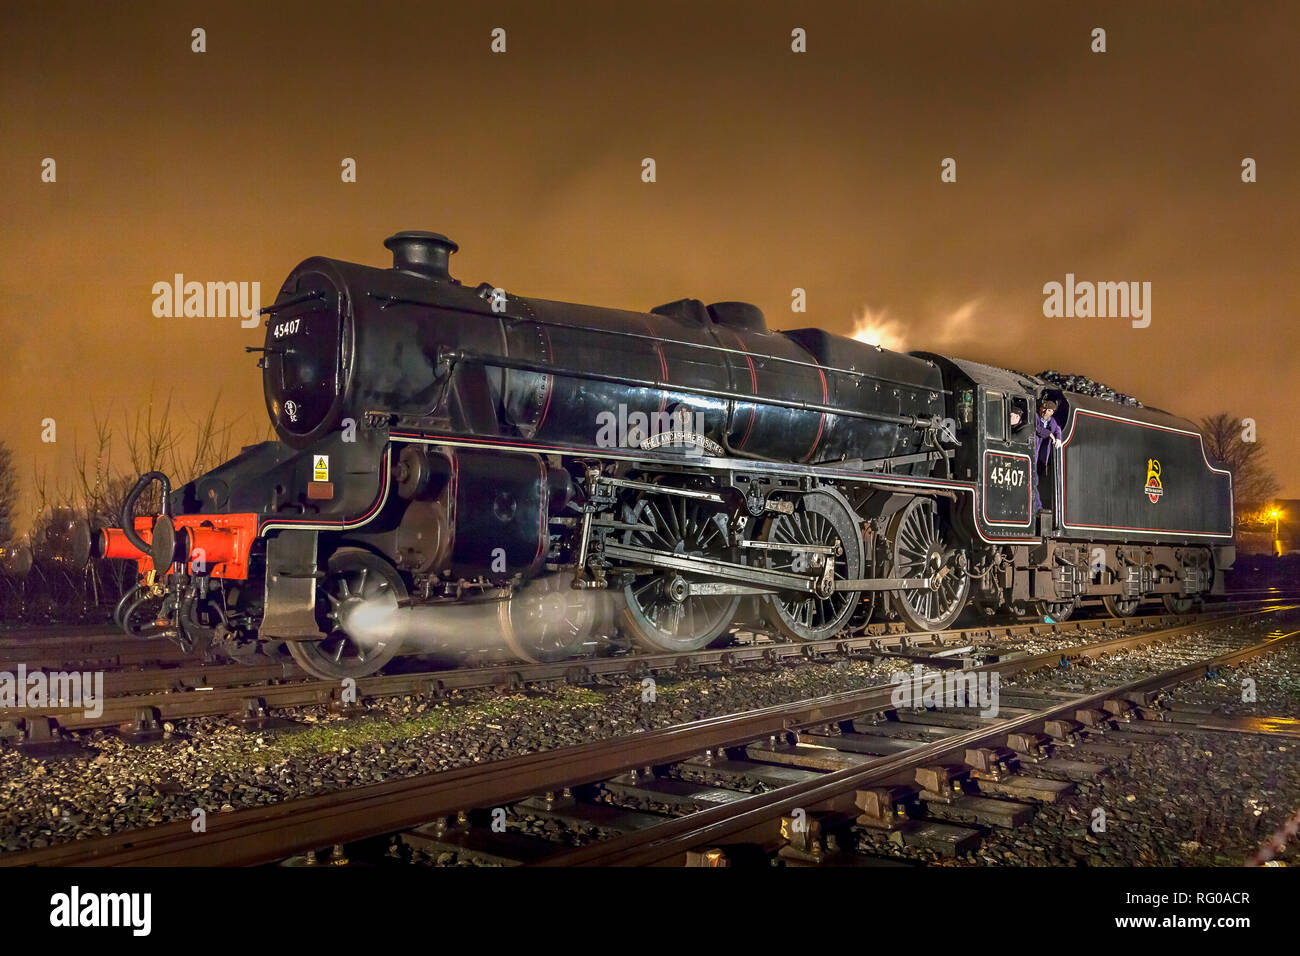 The East Lancashire Railway. The Lancashire Fusilier Black Five steam engine pictured at night. Stock Photo